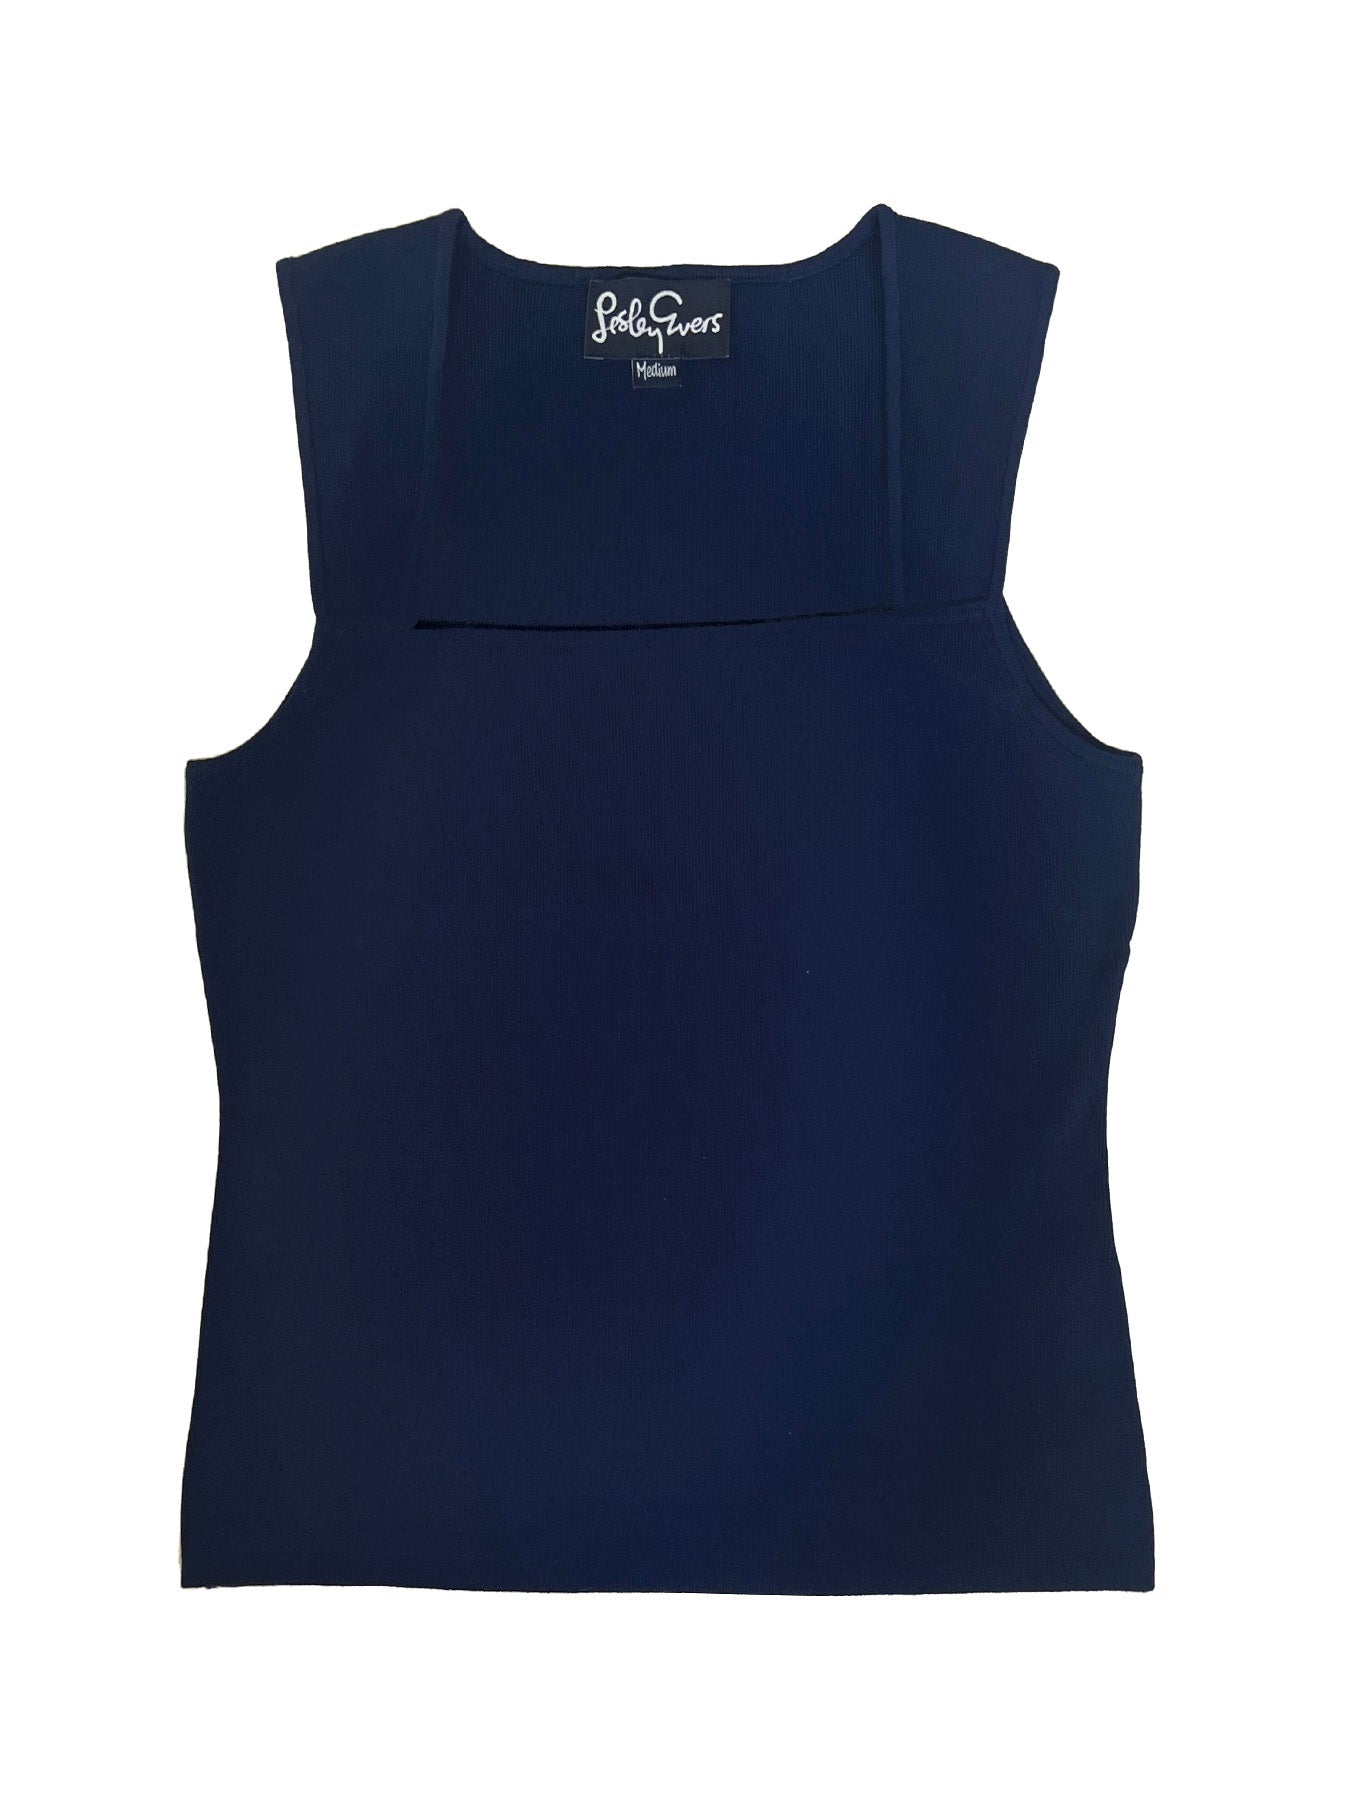 LUCY top Navy - Lesley Evers-Best Seller-Shop-Shop/All Products